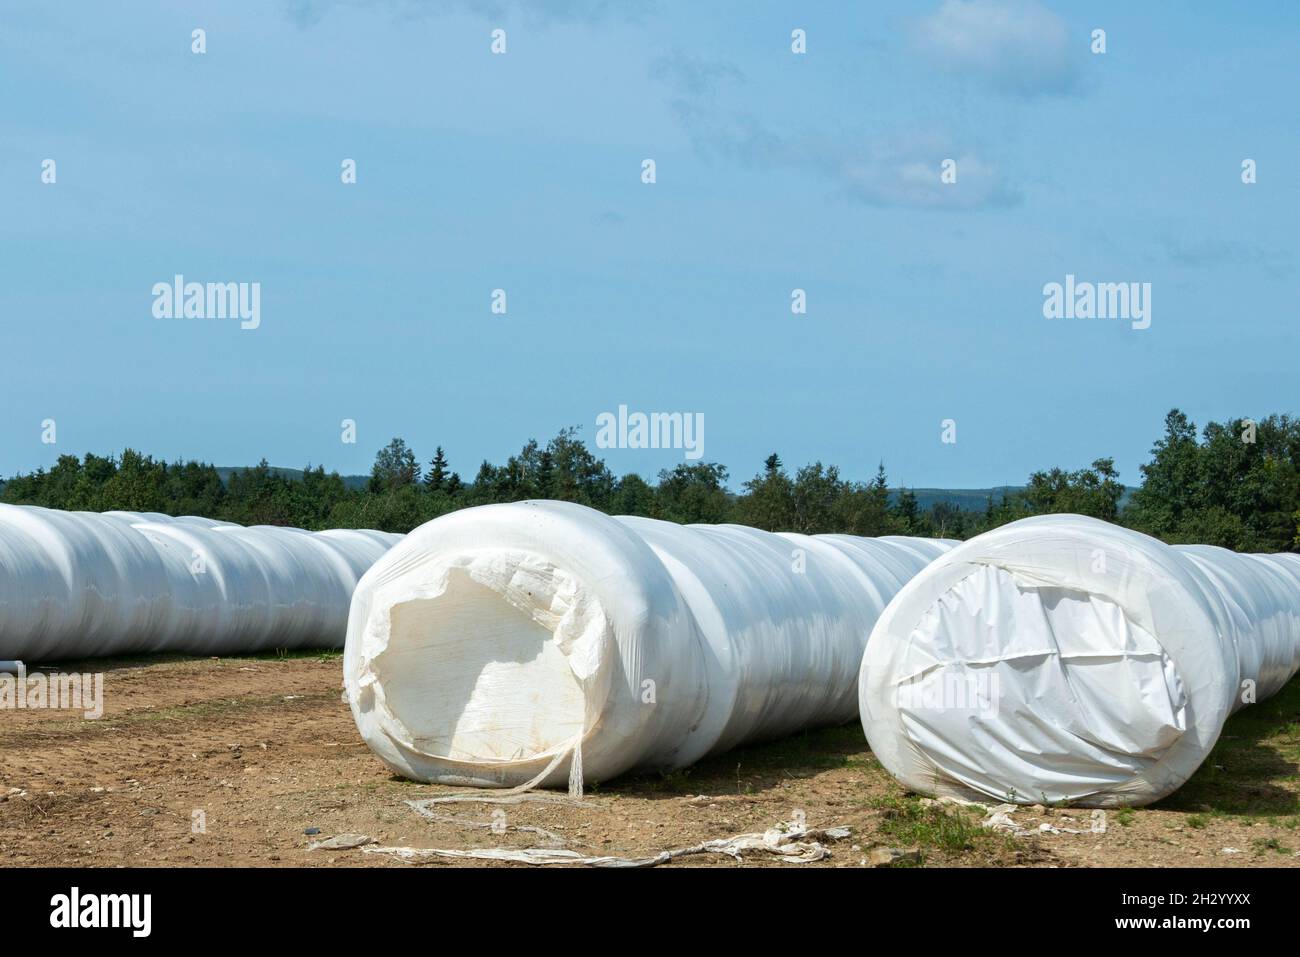 Multiple long rows of white silo bales of hay in a farmer's field. The farm has green hay growing around the stored haystack rolls on pasture land. Stock Photo